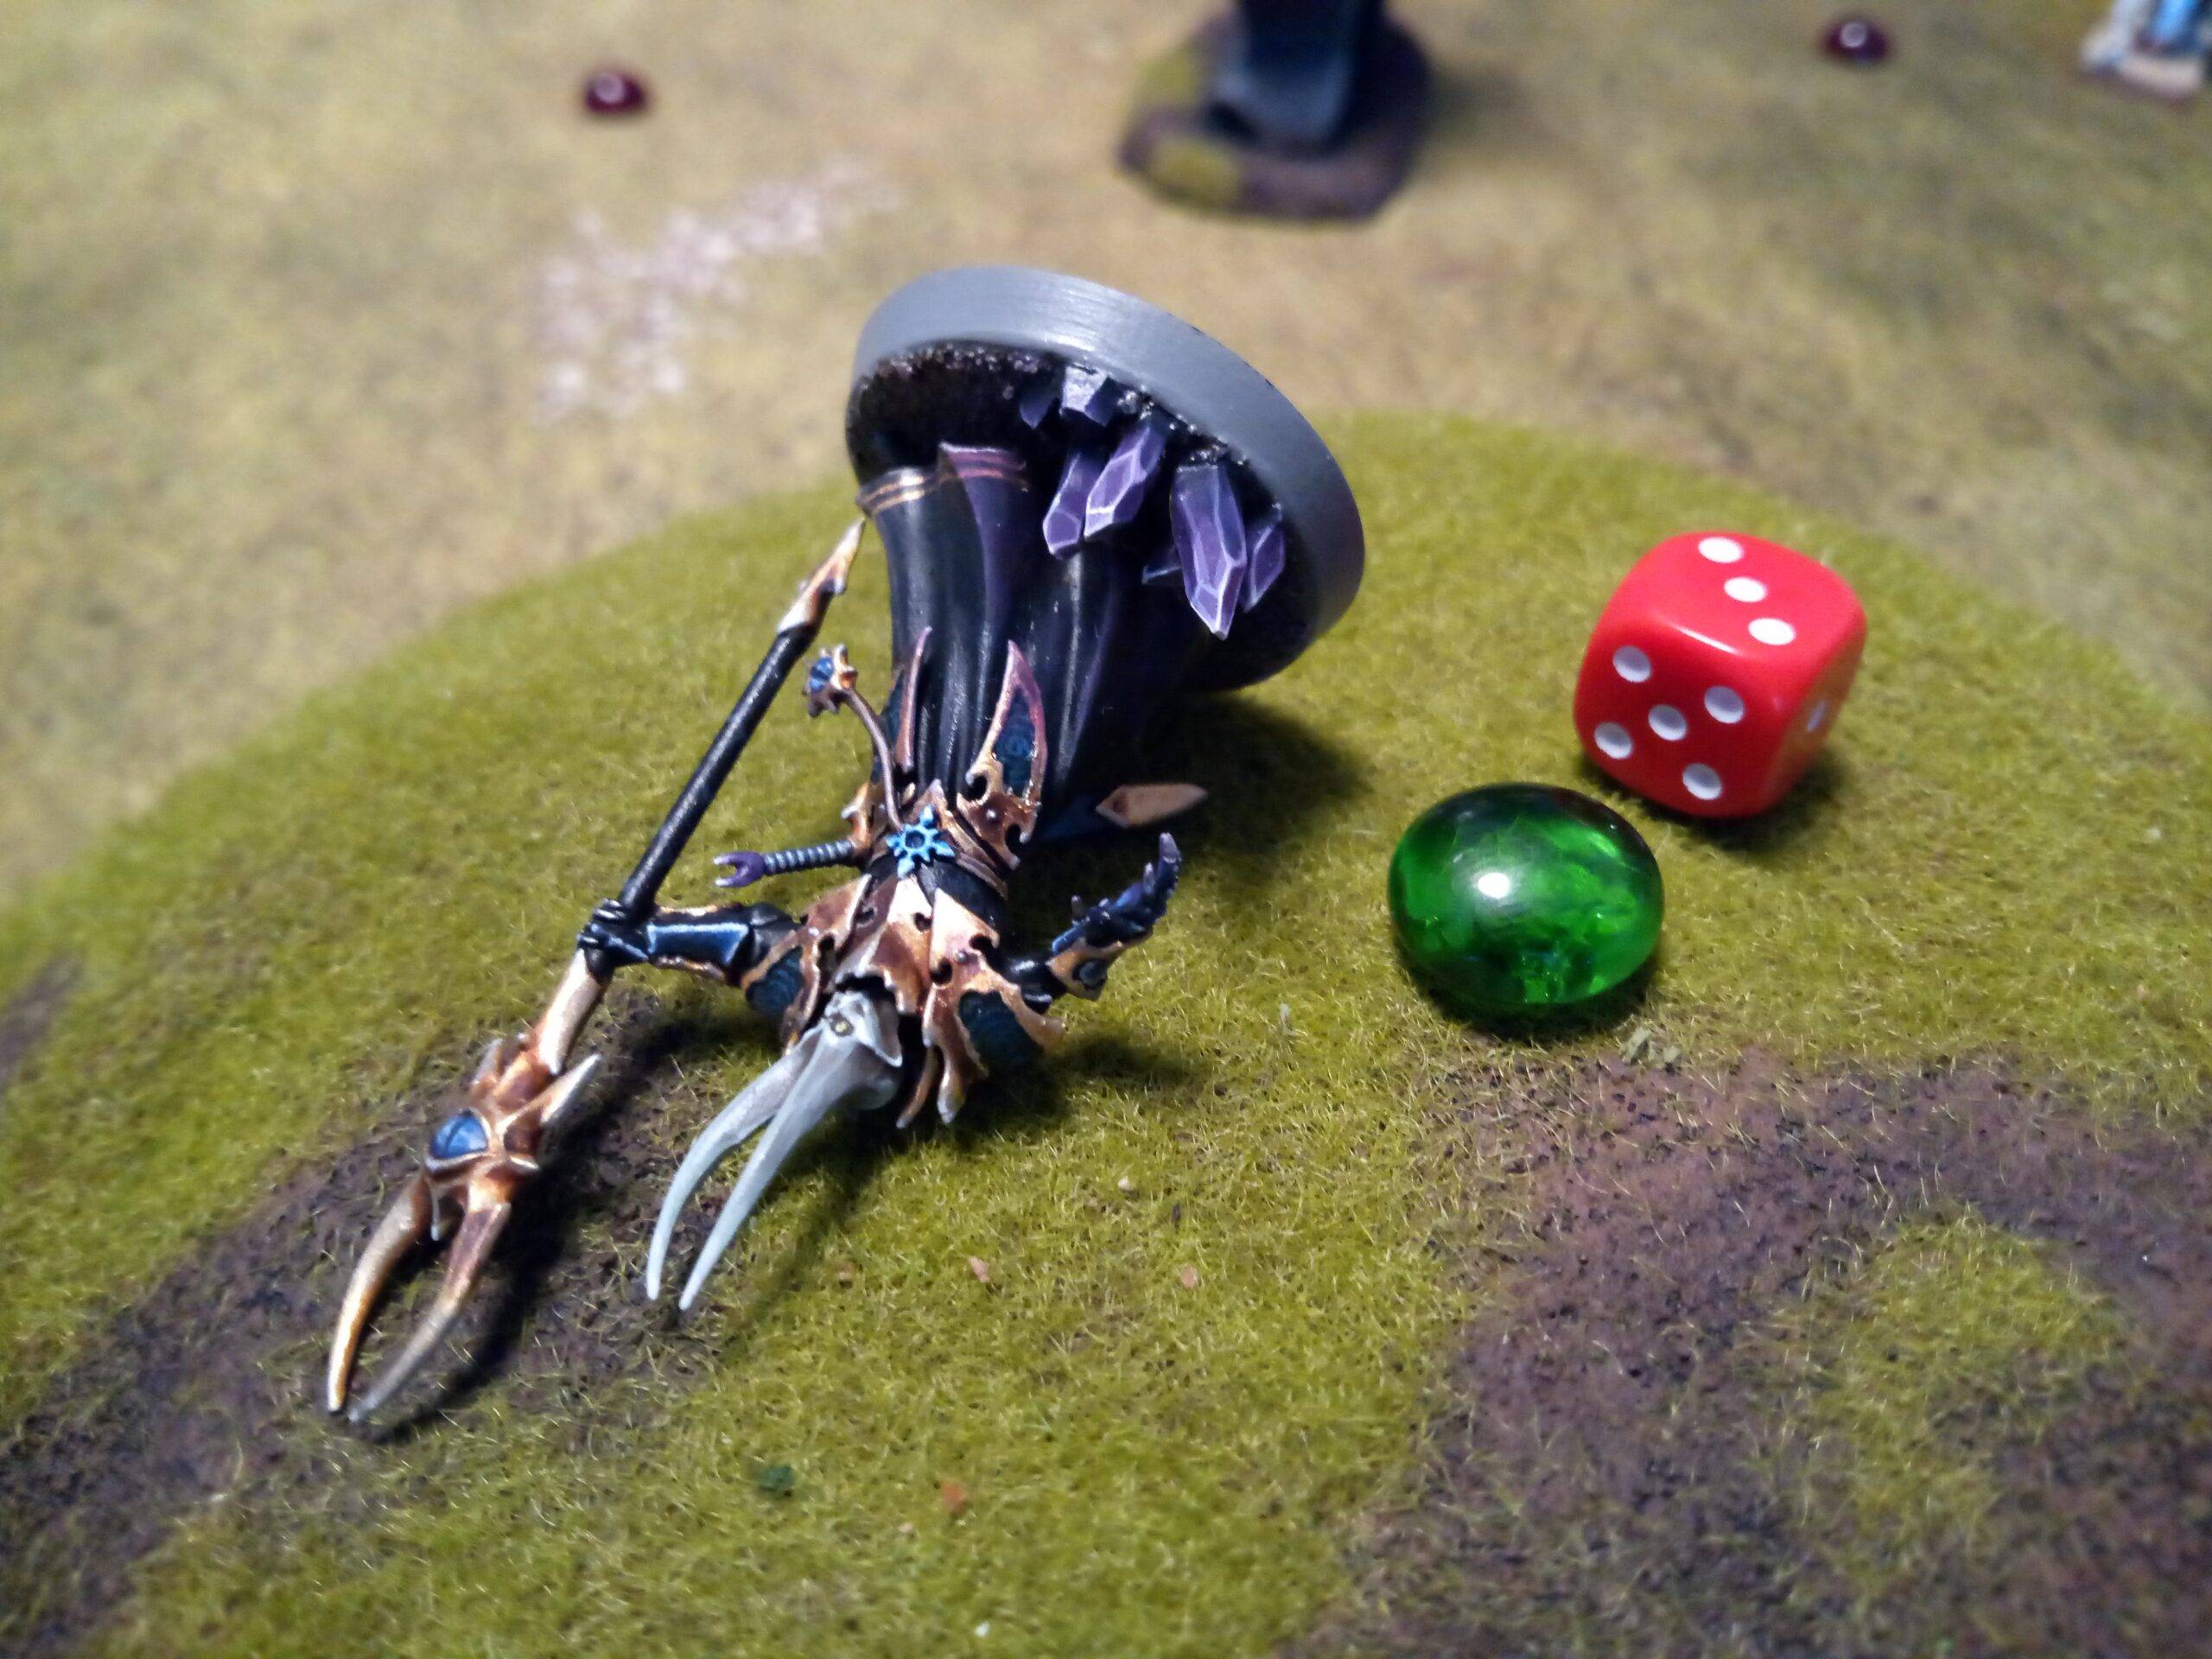 The death of the Havoc Sorcerer Lord, the end of a 2000 points game of One Page Rules Age of Fantasy.